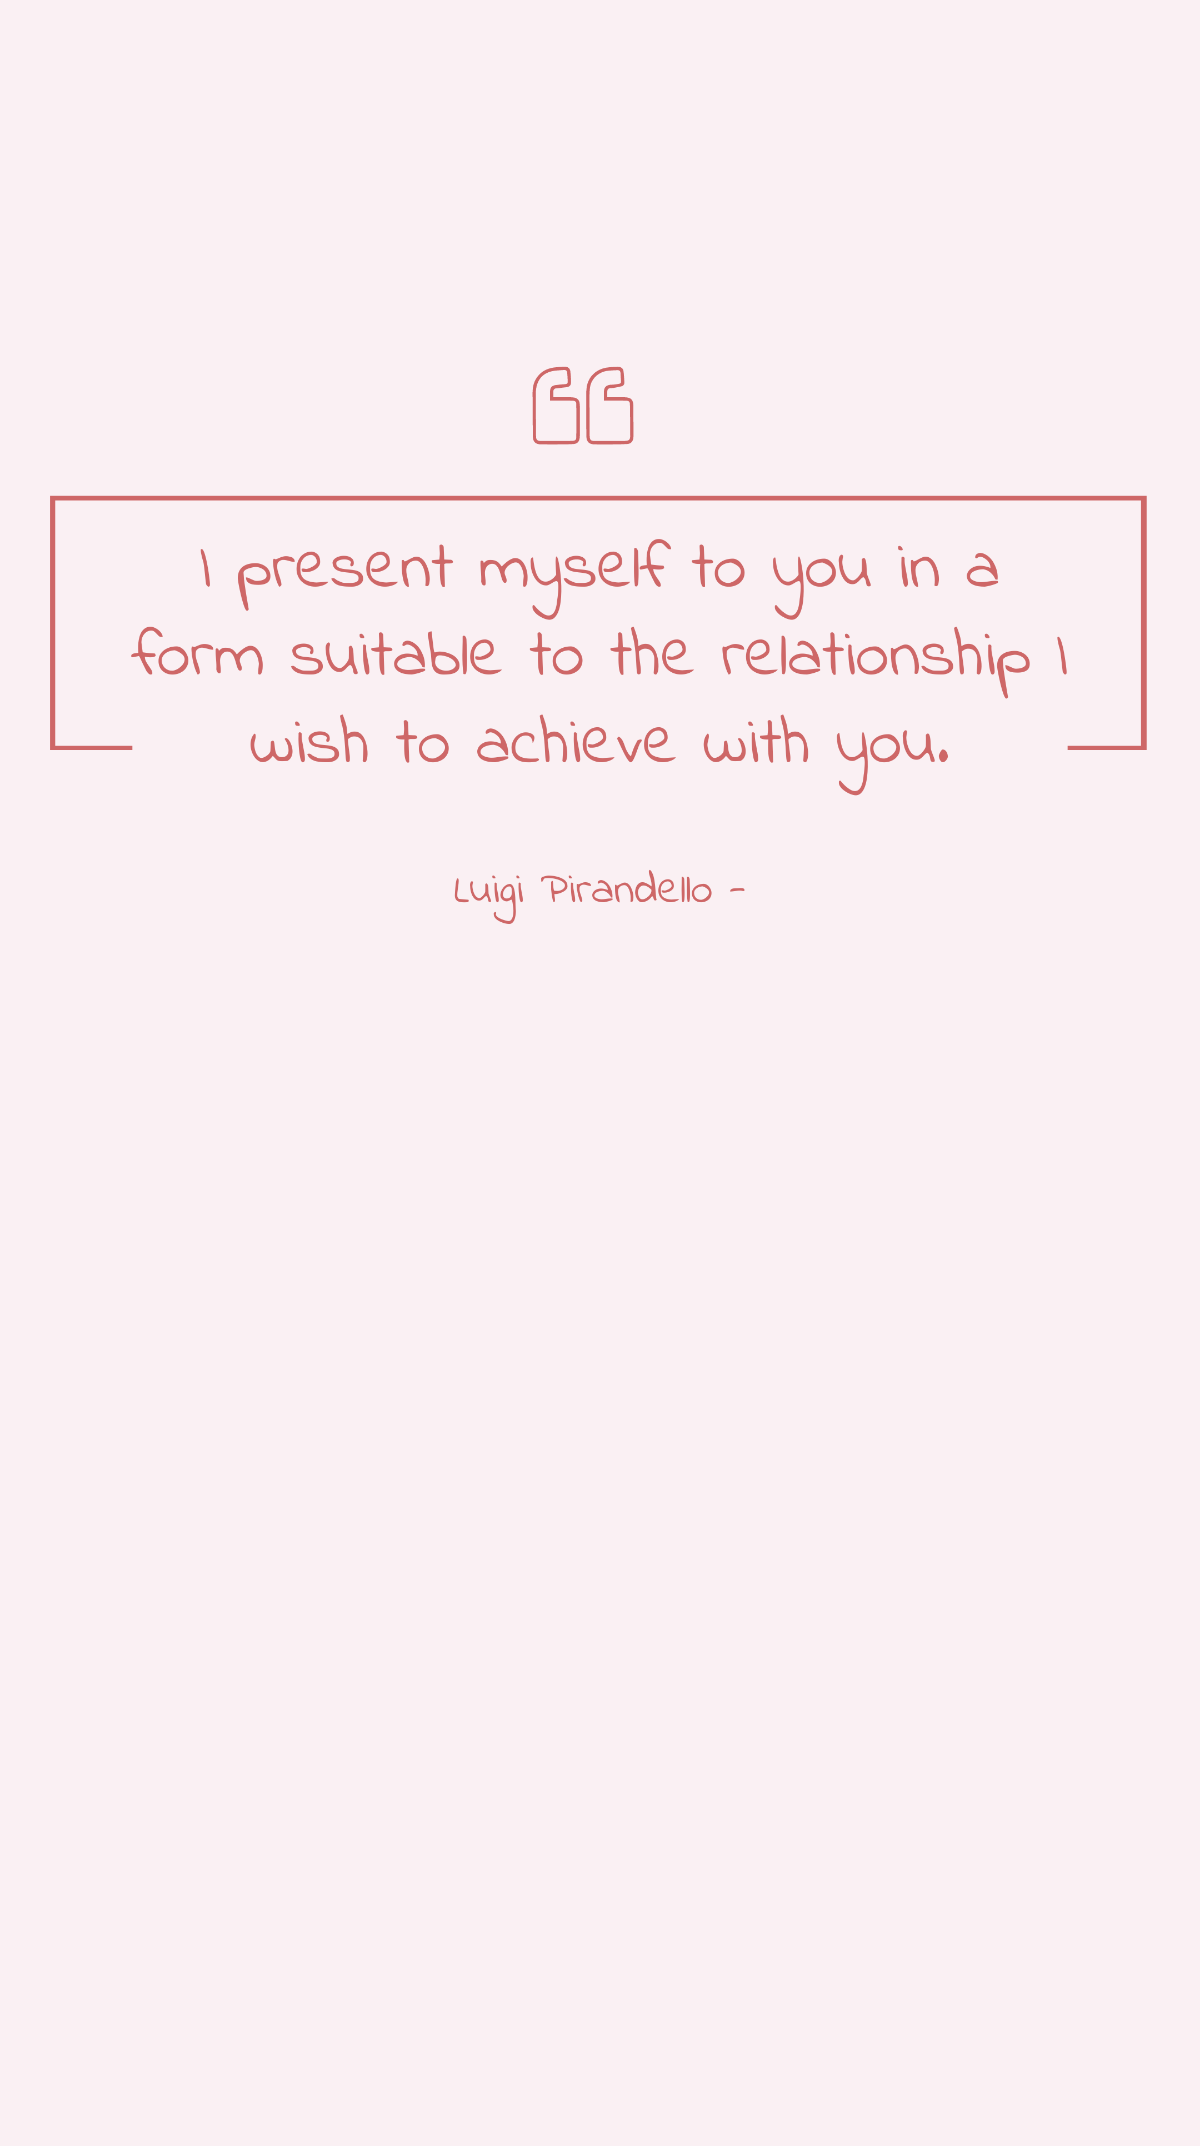 Luigi Pirandello - I present myself to you in a form suitable to the relationship I wish to achieve with you. Template